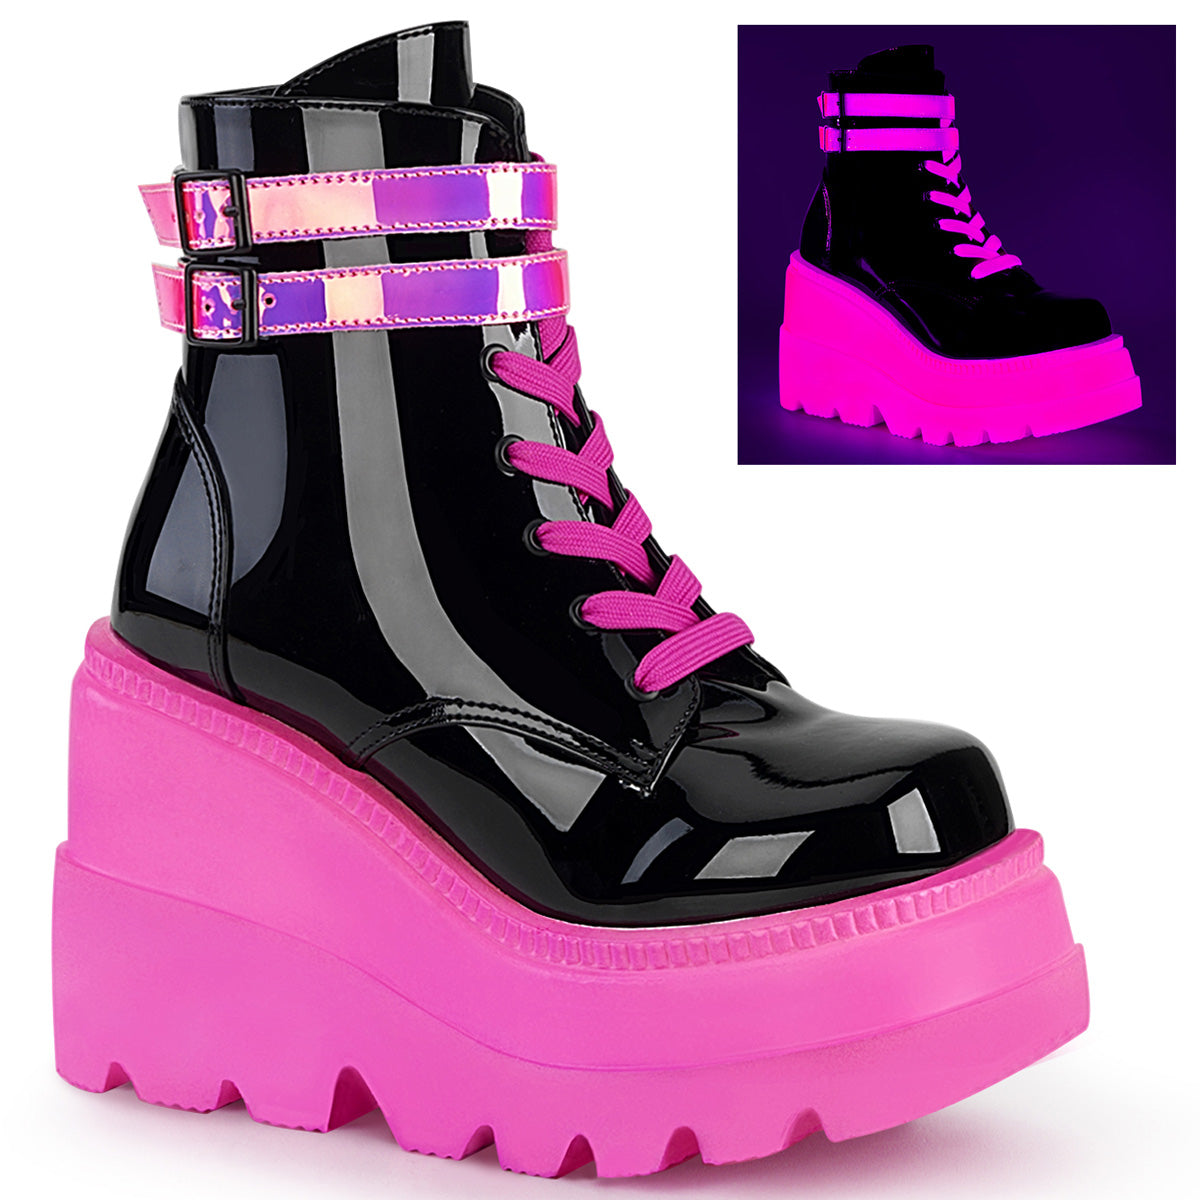 DemoniaCult Womens Ankle Boots SHAKER-52 Blk Pat-UV Neon Pink